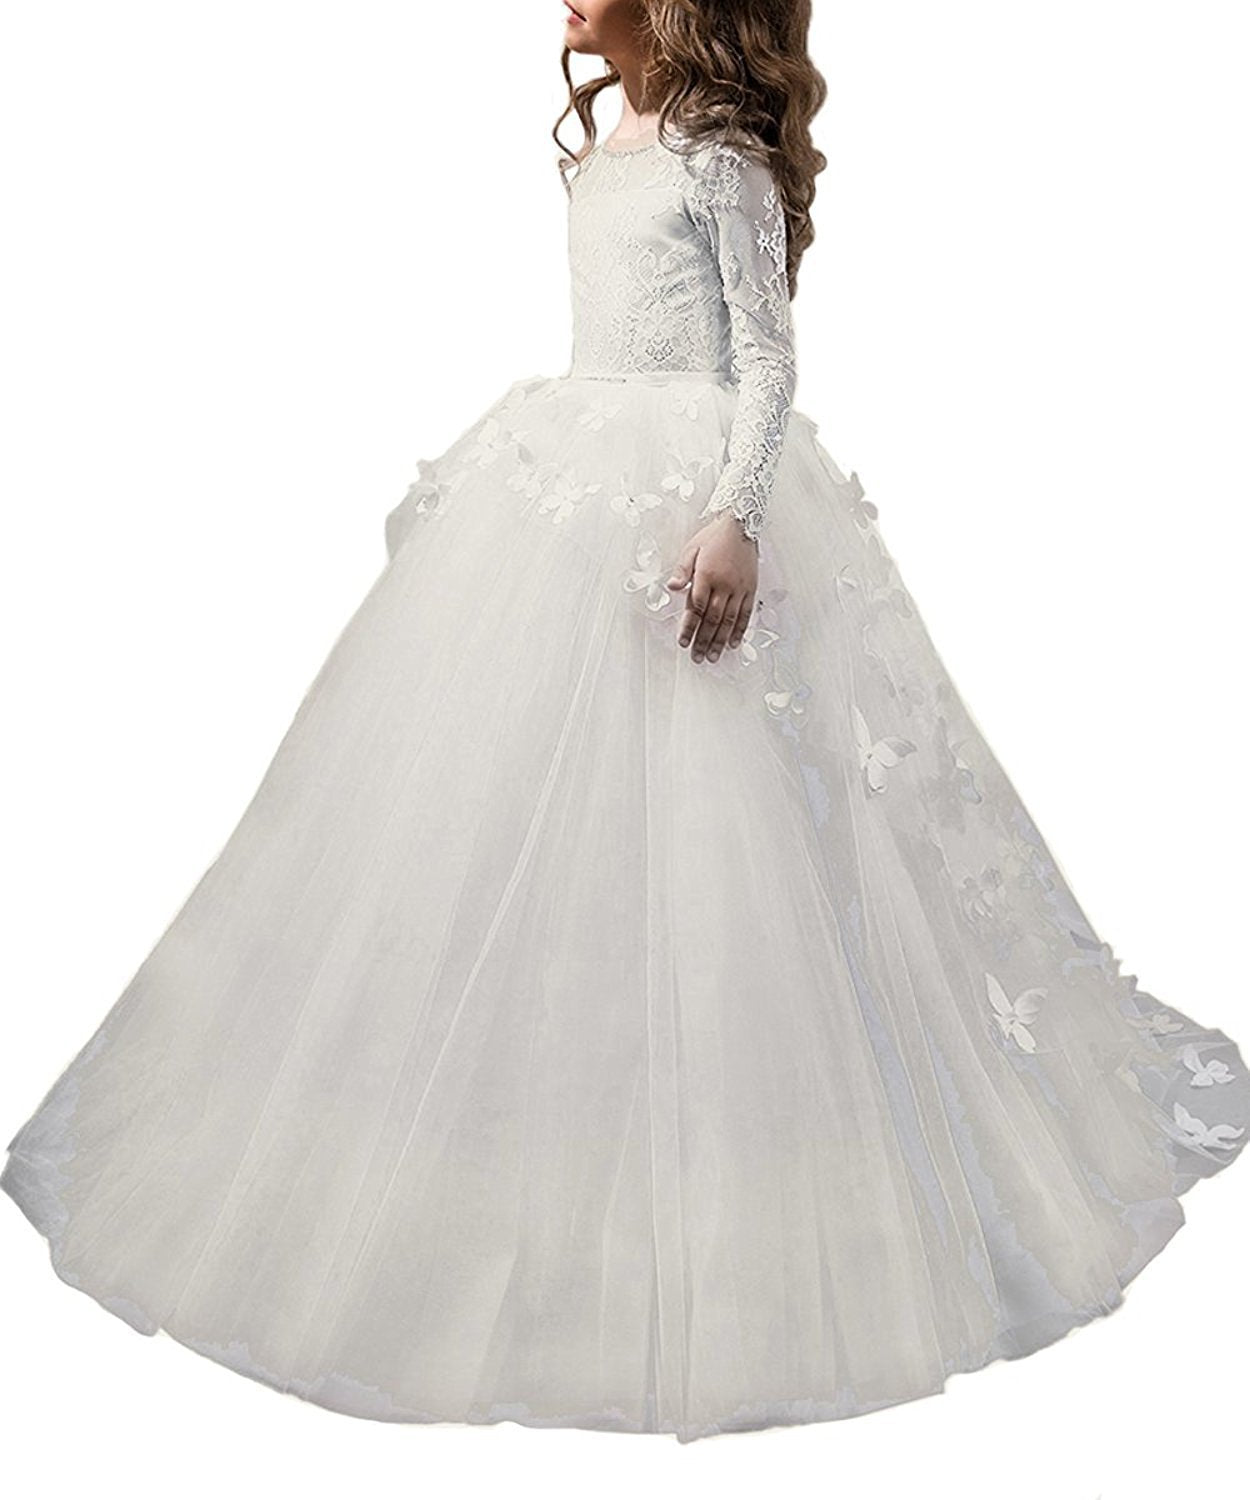 Avadress Long Sleeves Lace Communion Ball Gowns